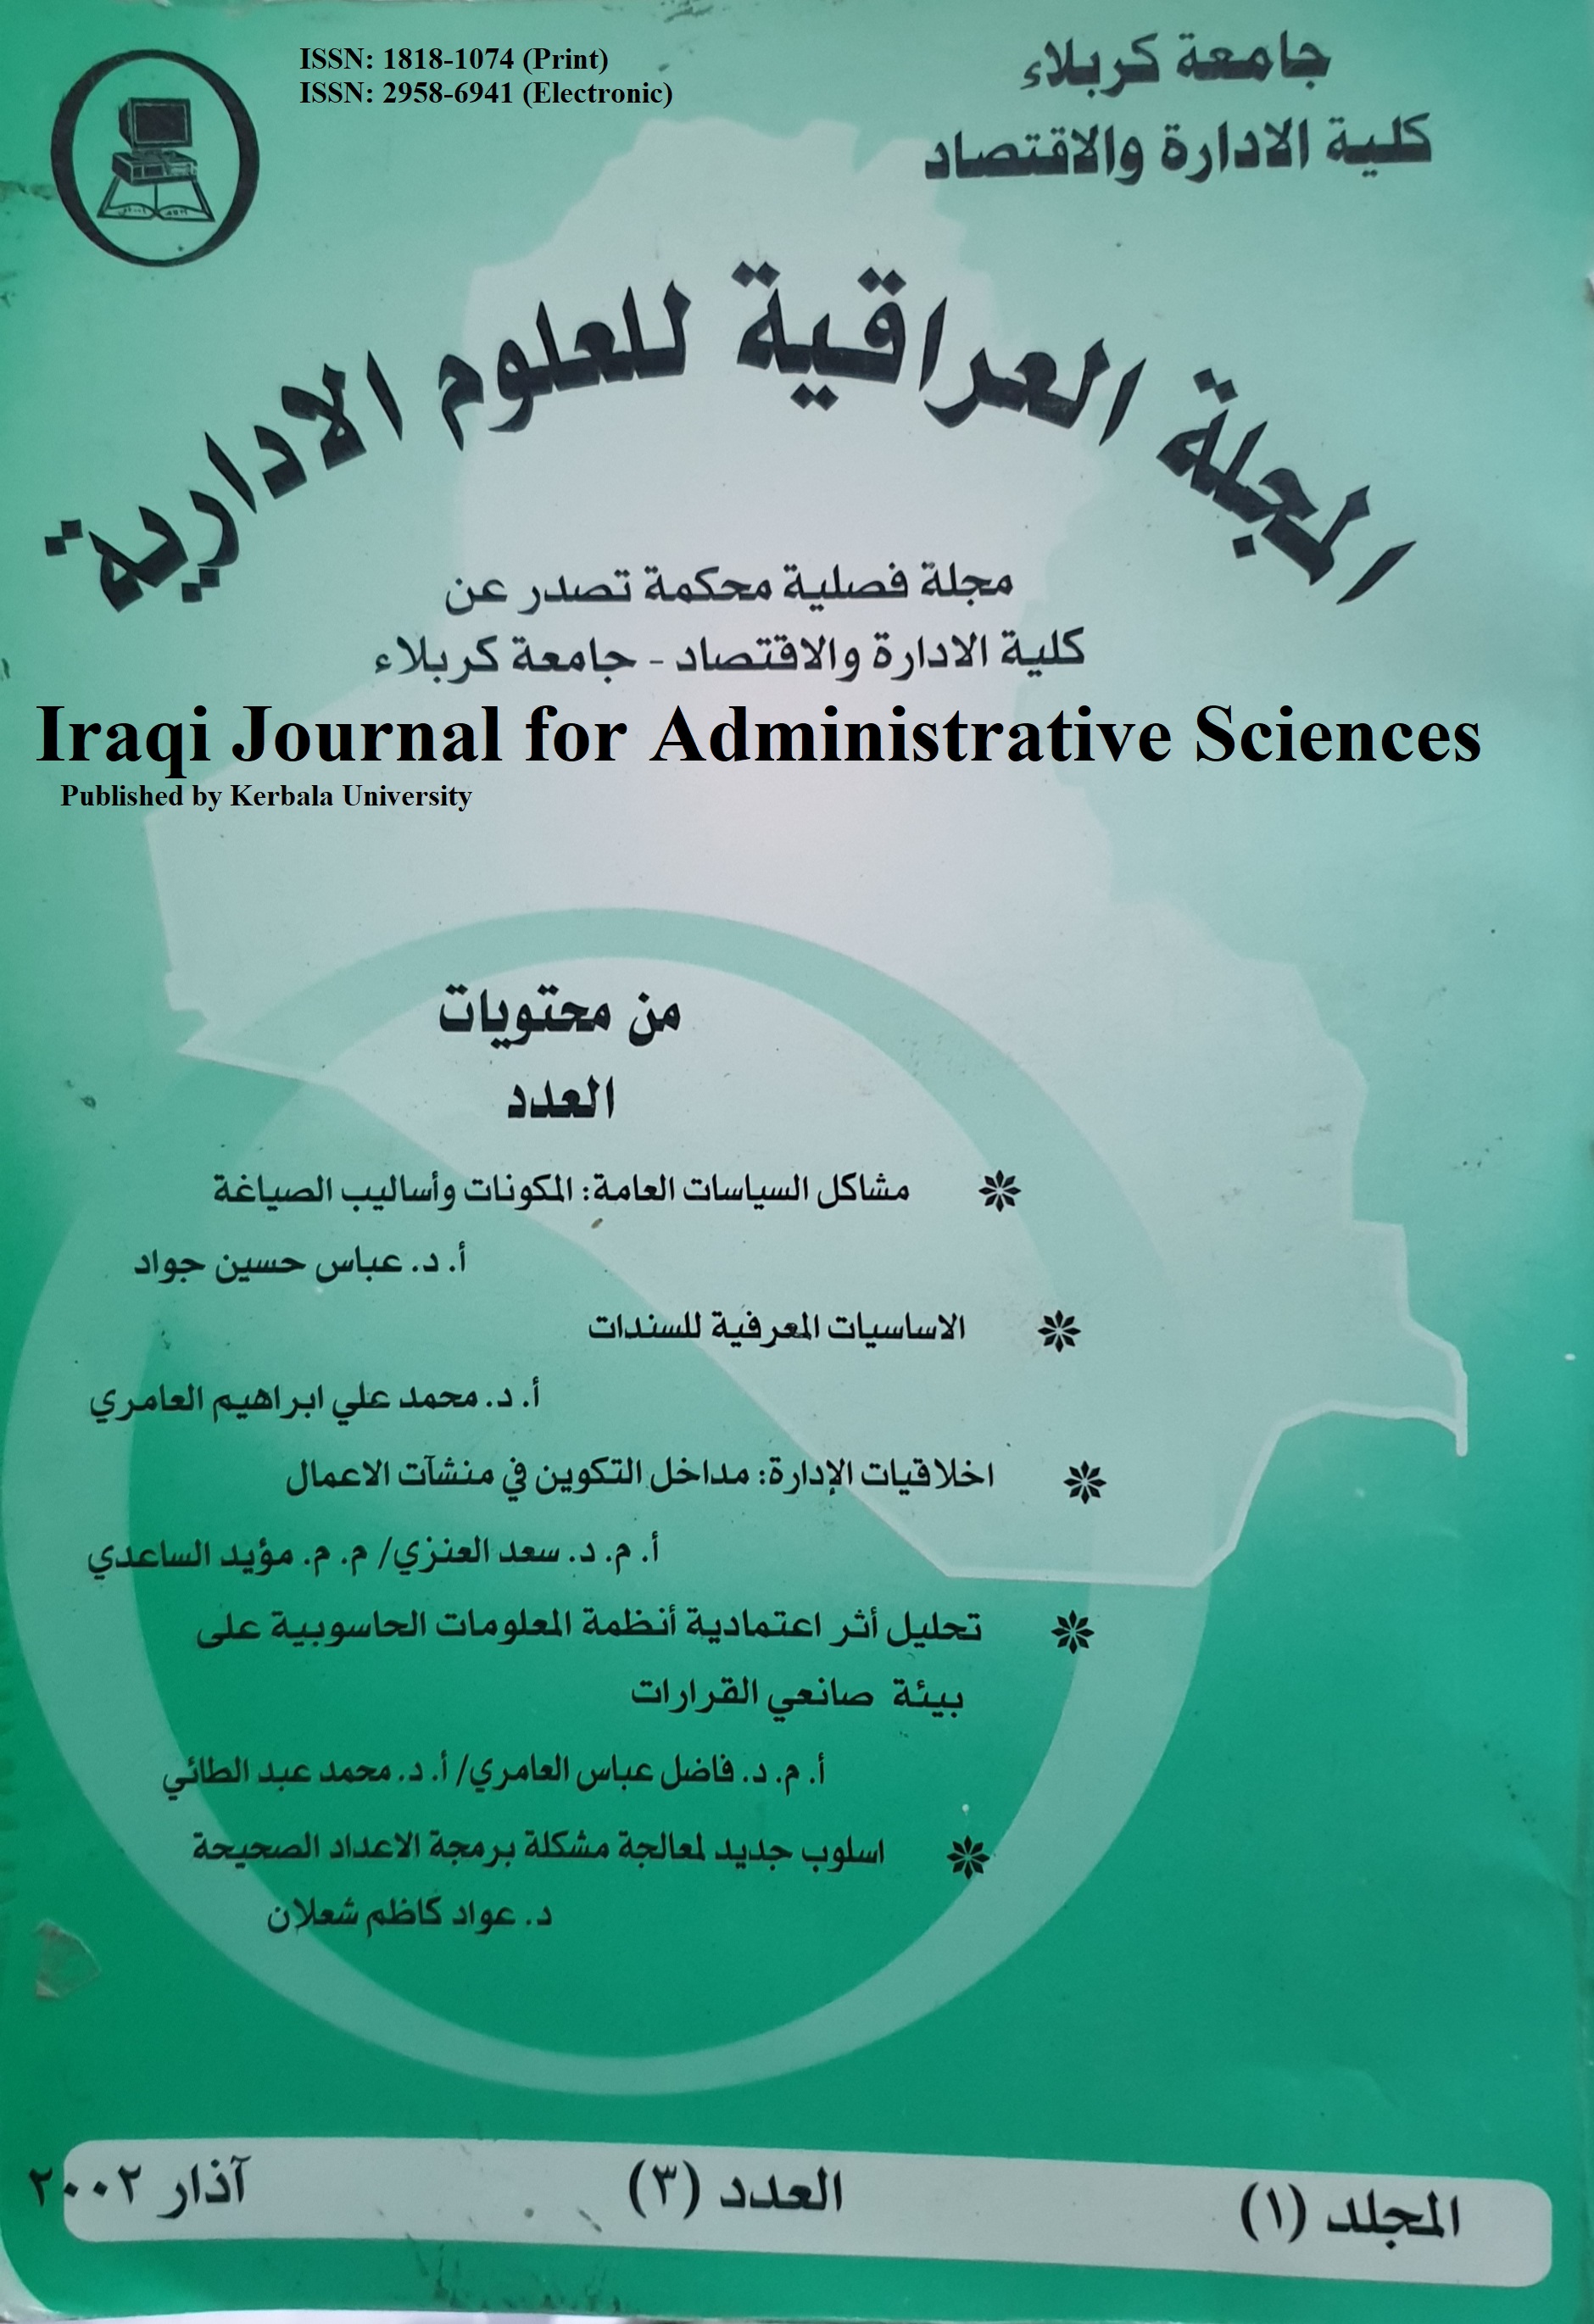 					View Vol. 1 No. 3 (2002): Iraqi Journal for Administrative Sciences
				